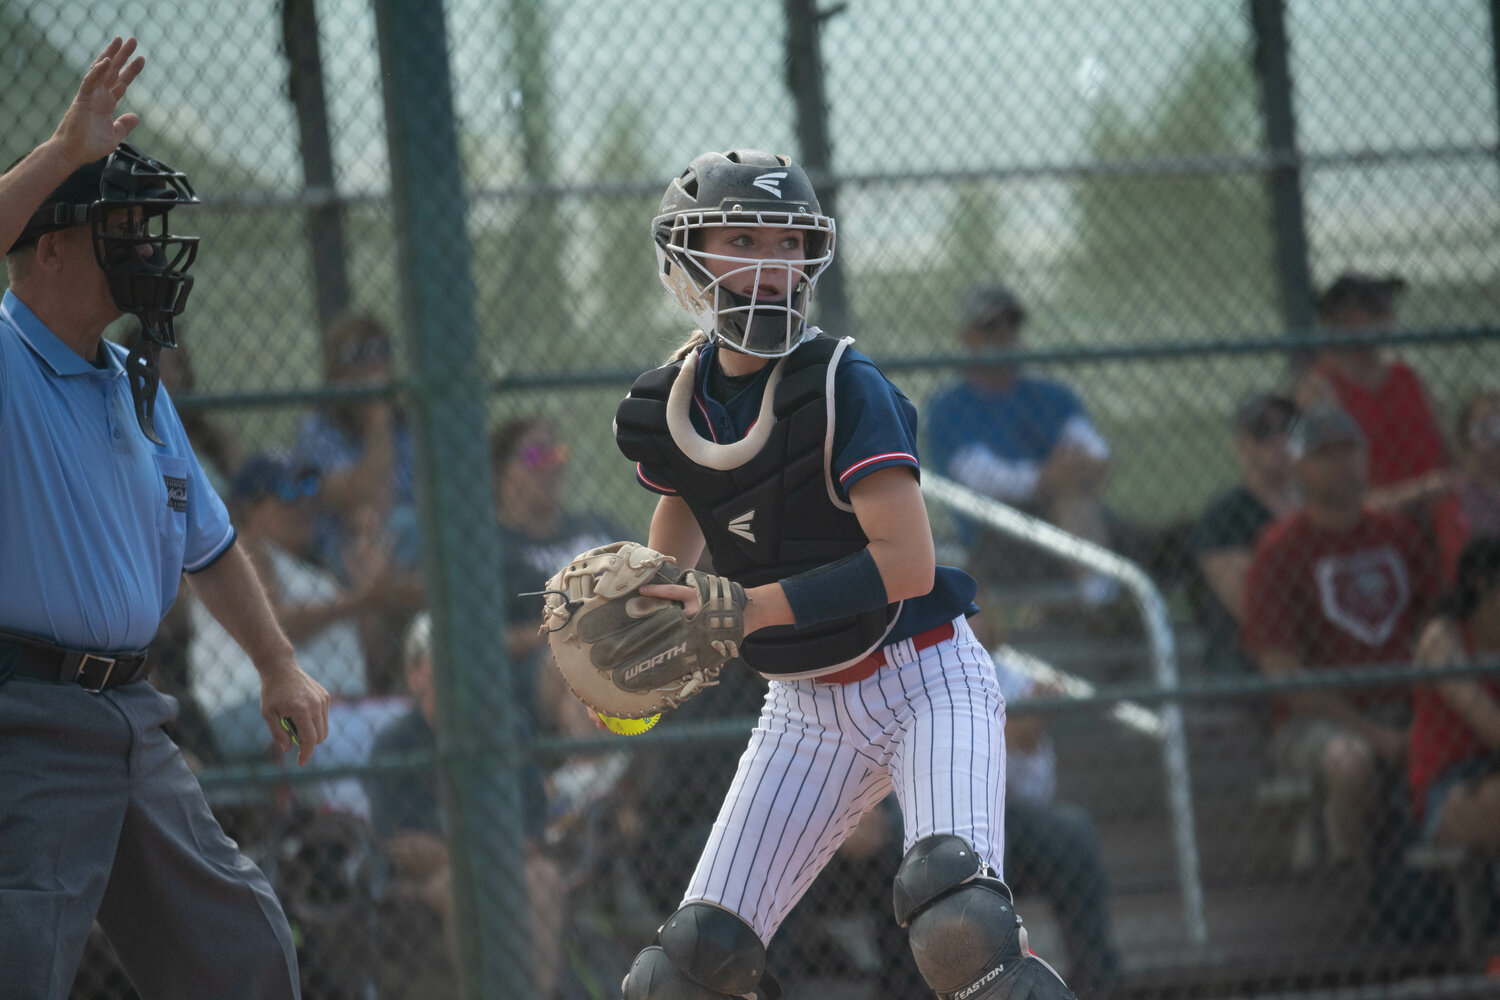 Catcher Payton Peterson looks a runner back to first during Pe Ell-Willapa Valley's loser-out game against Kittitas in the 2B state tournament, May 26 in Yakima.